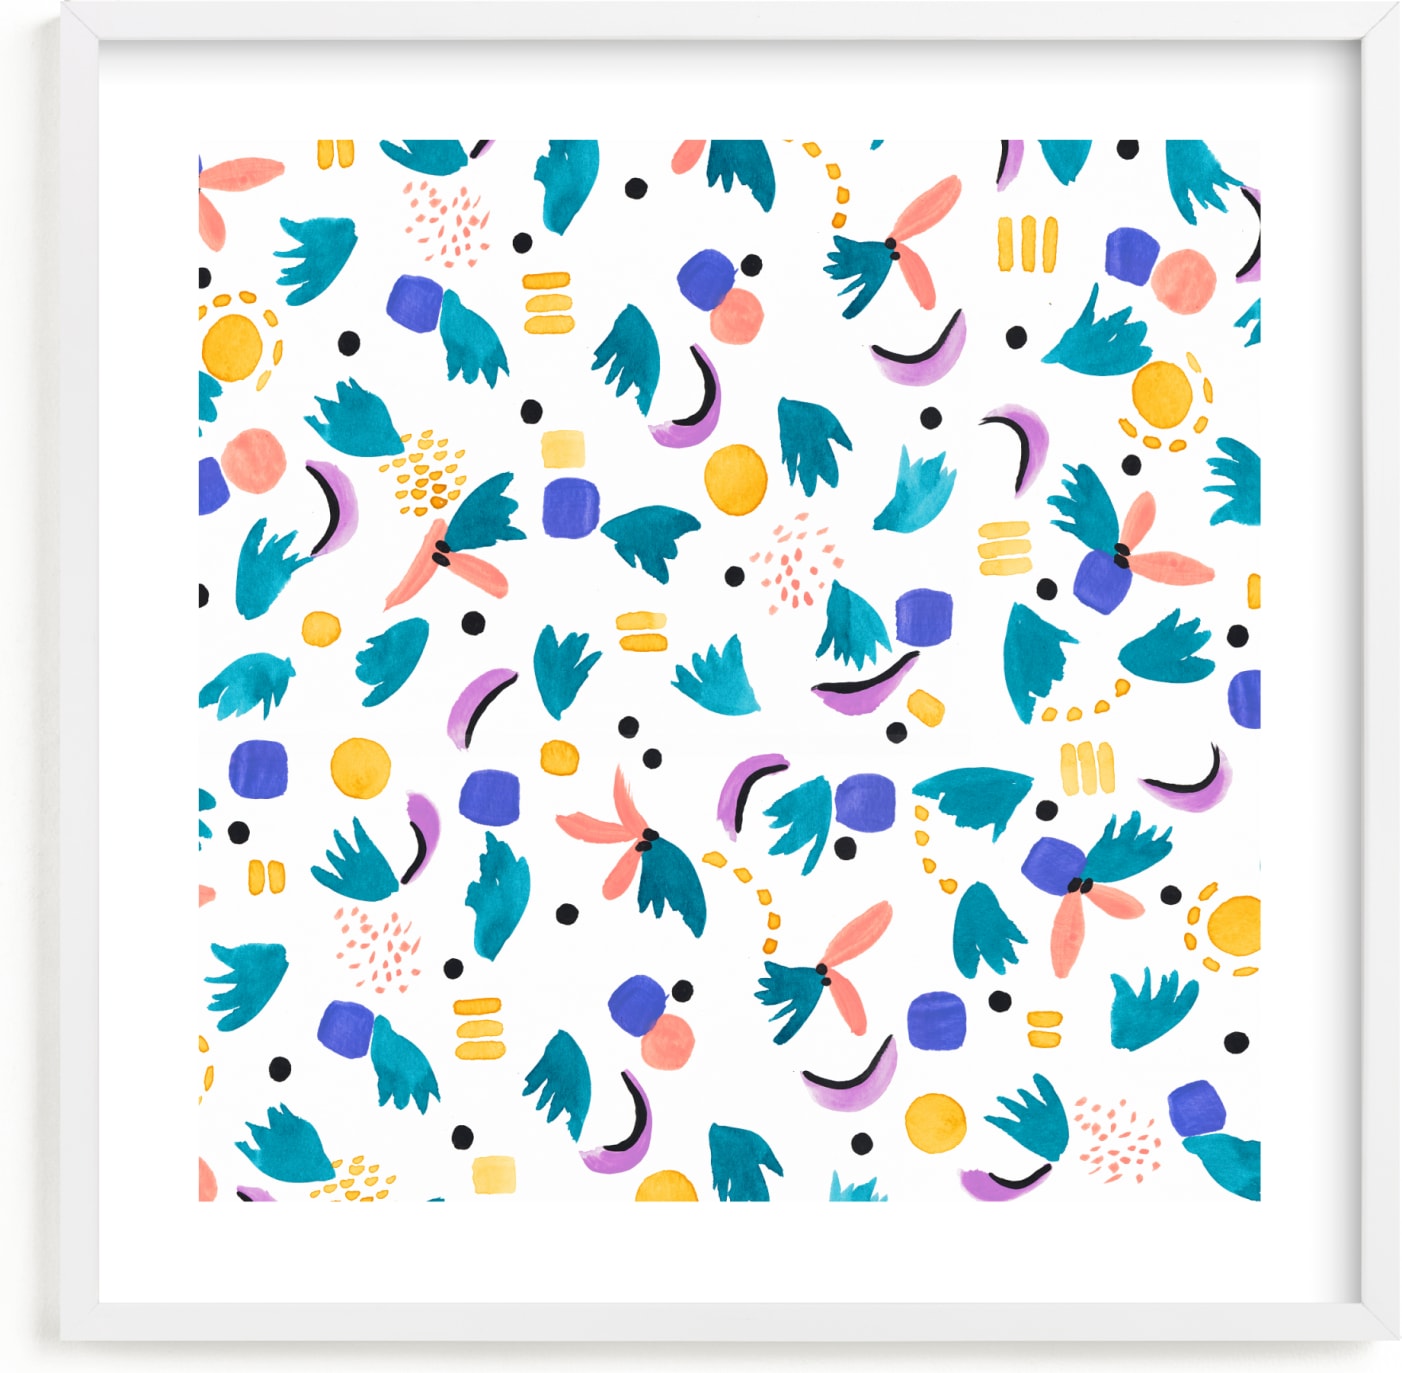 This is a colorful kids wall art by FERNANDA MARTINEZ called Geometric plants.